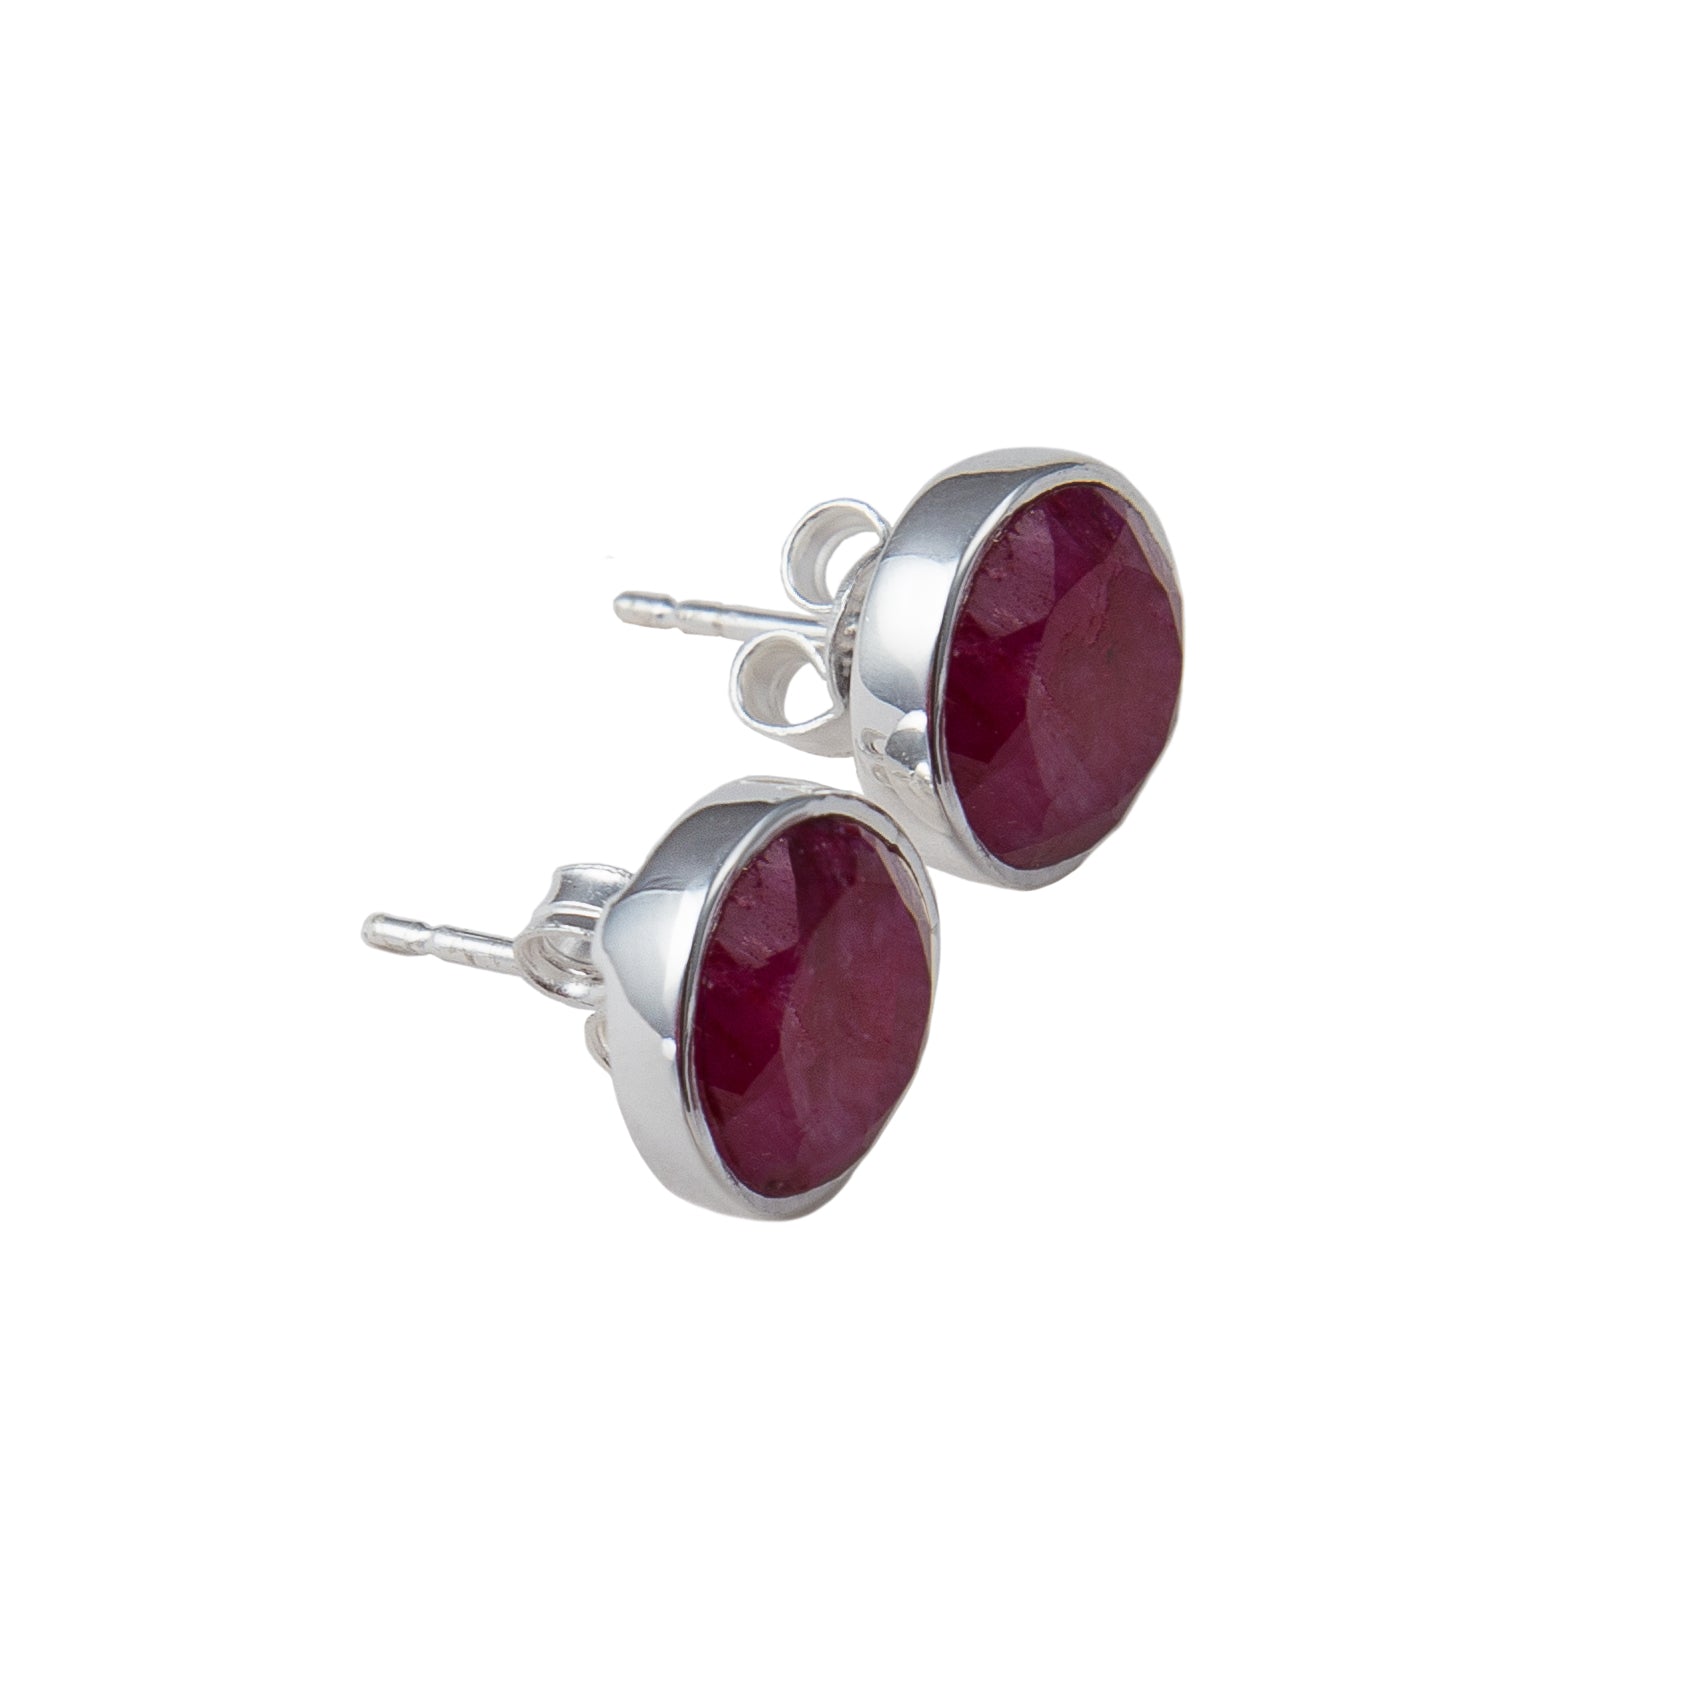 Ruby Quartz Studs in Sterling Silver with a Round Faceted Gemstone